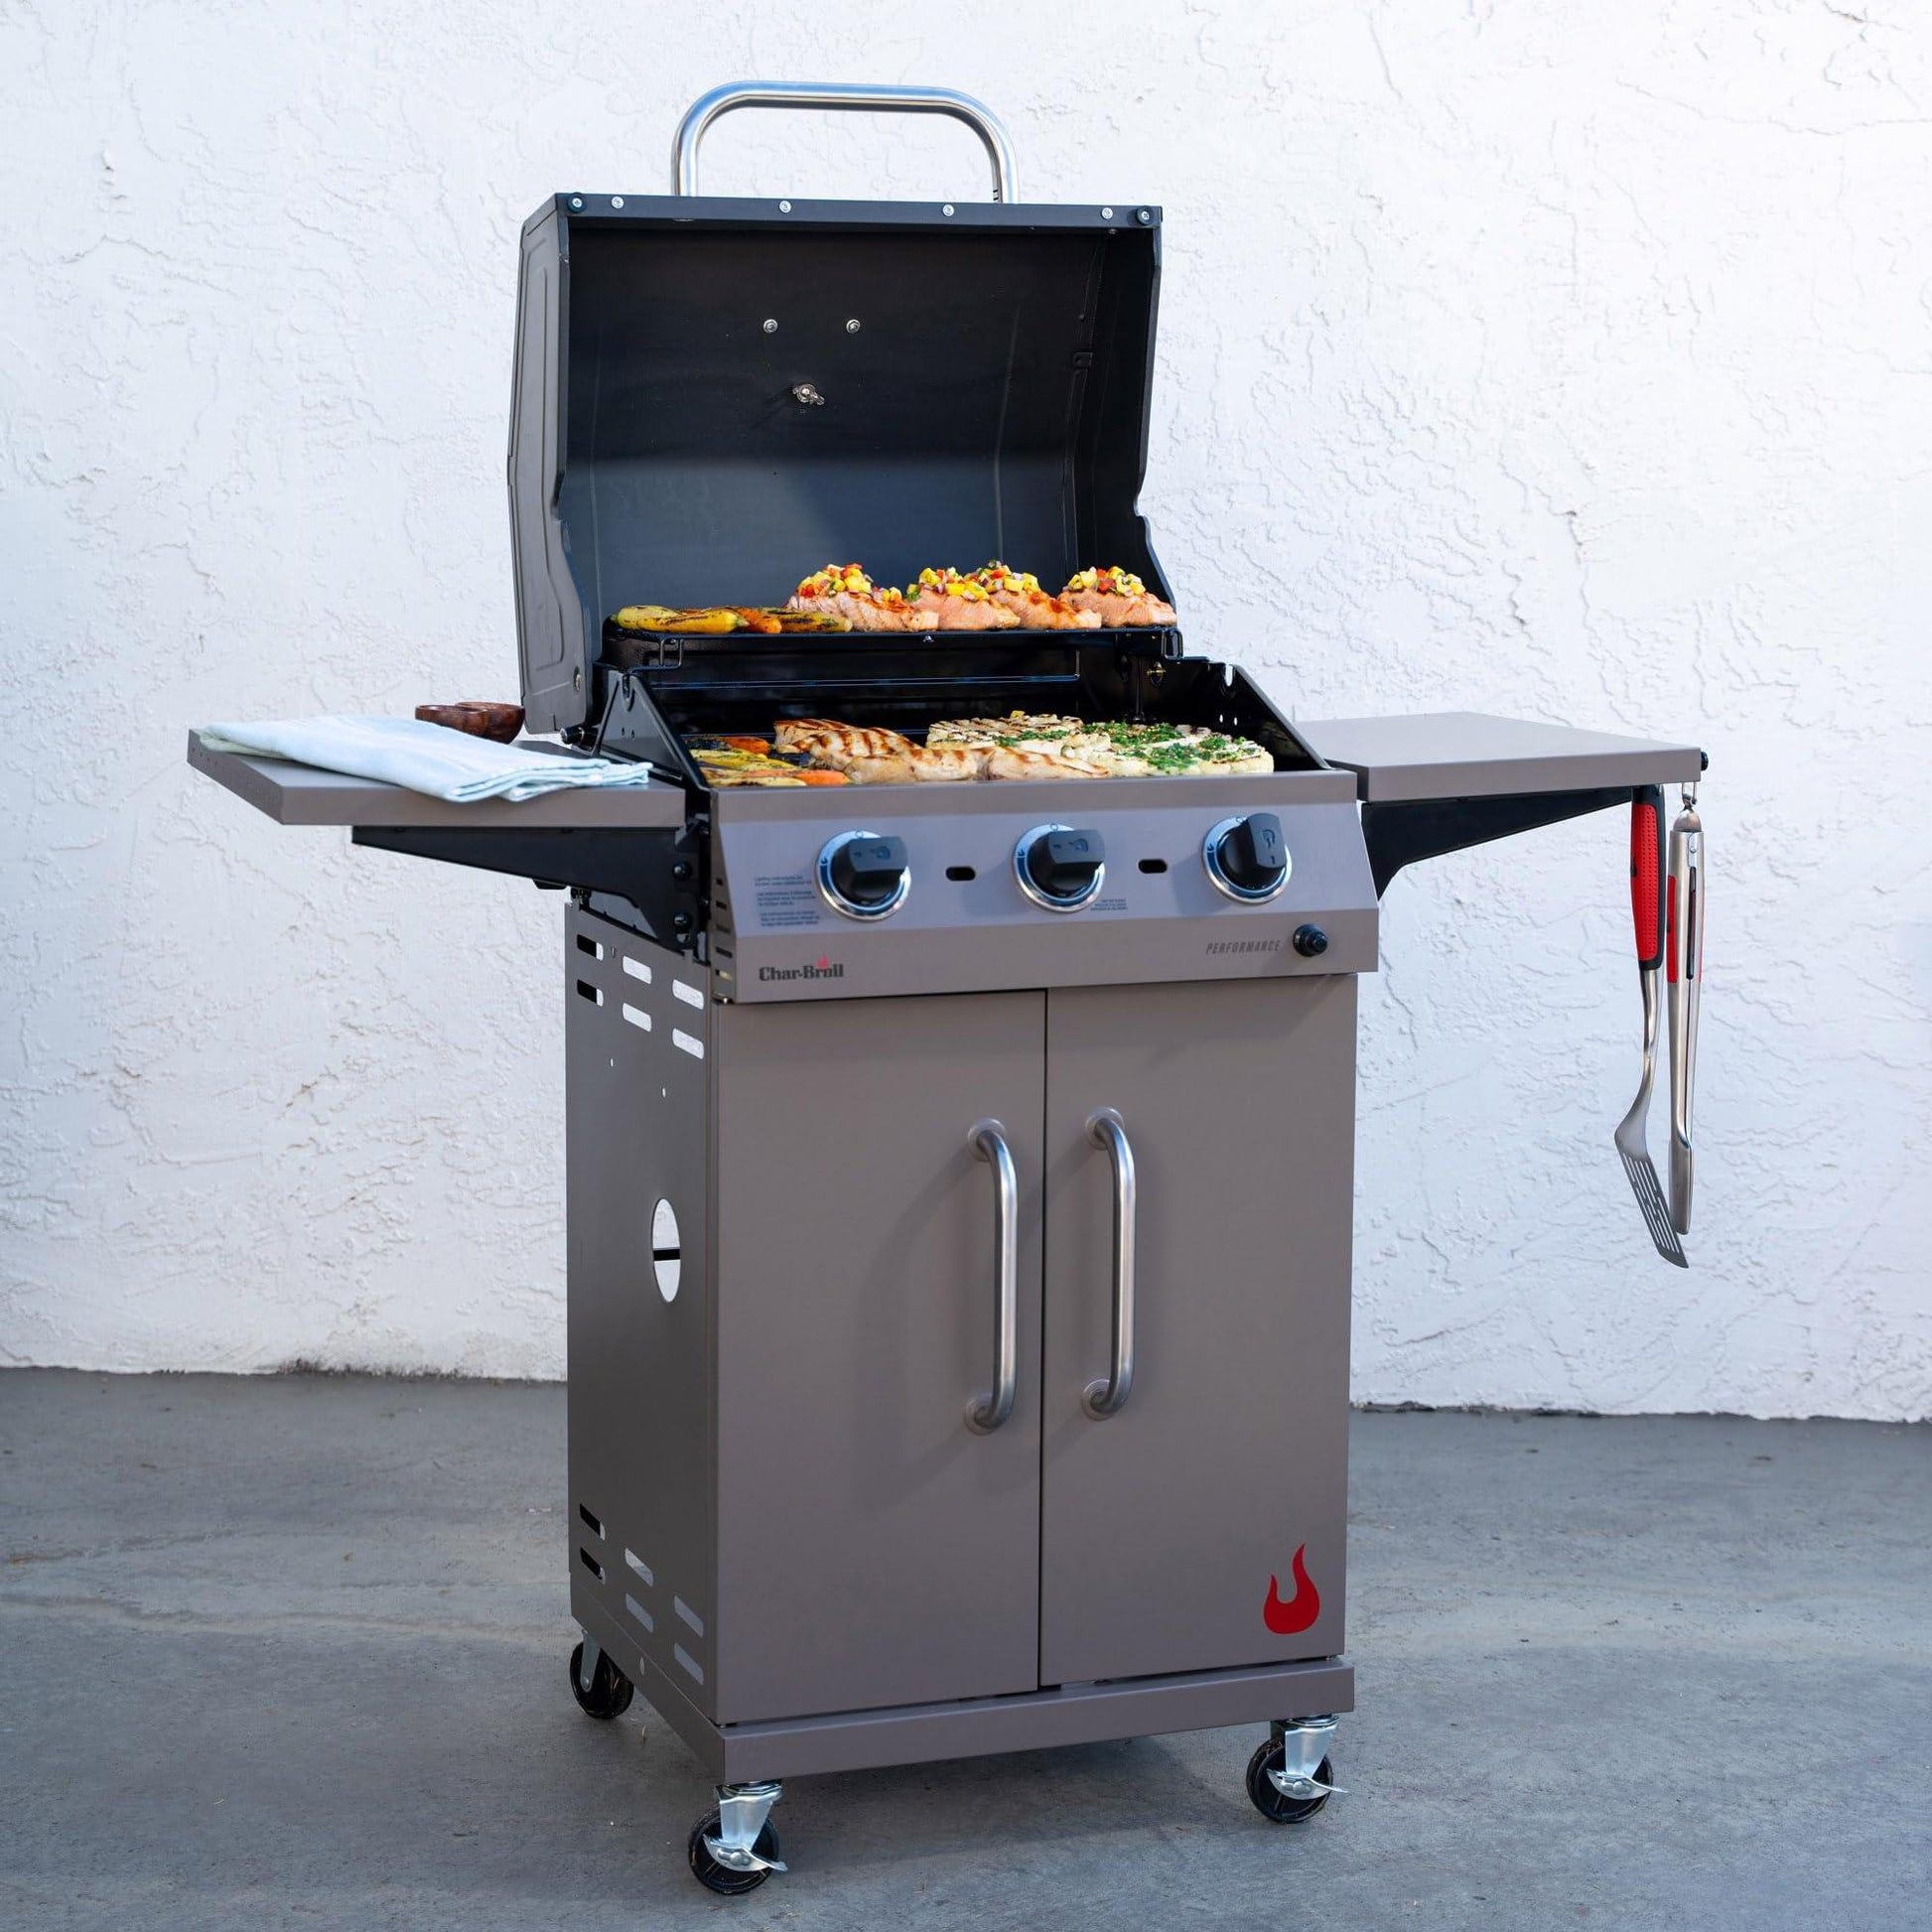 Char-Broil Performance Series Convective 3-Burner Cart Propane Gas Stainless Steel Grill - 463732823 - CookCave